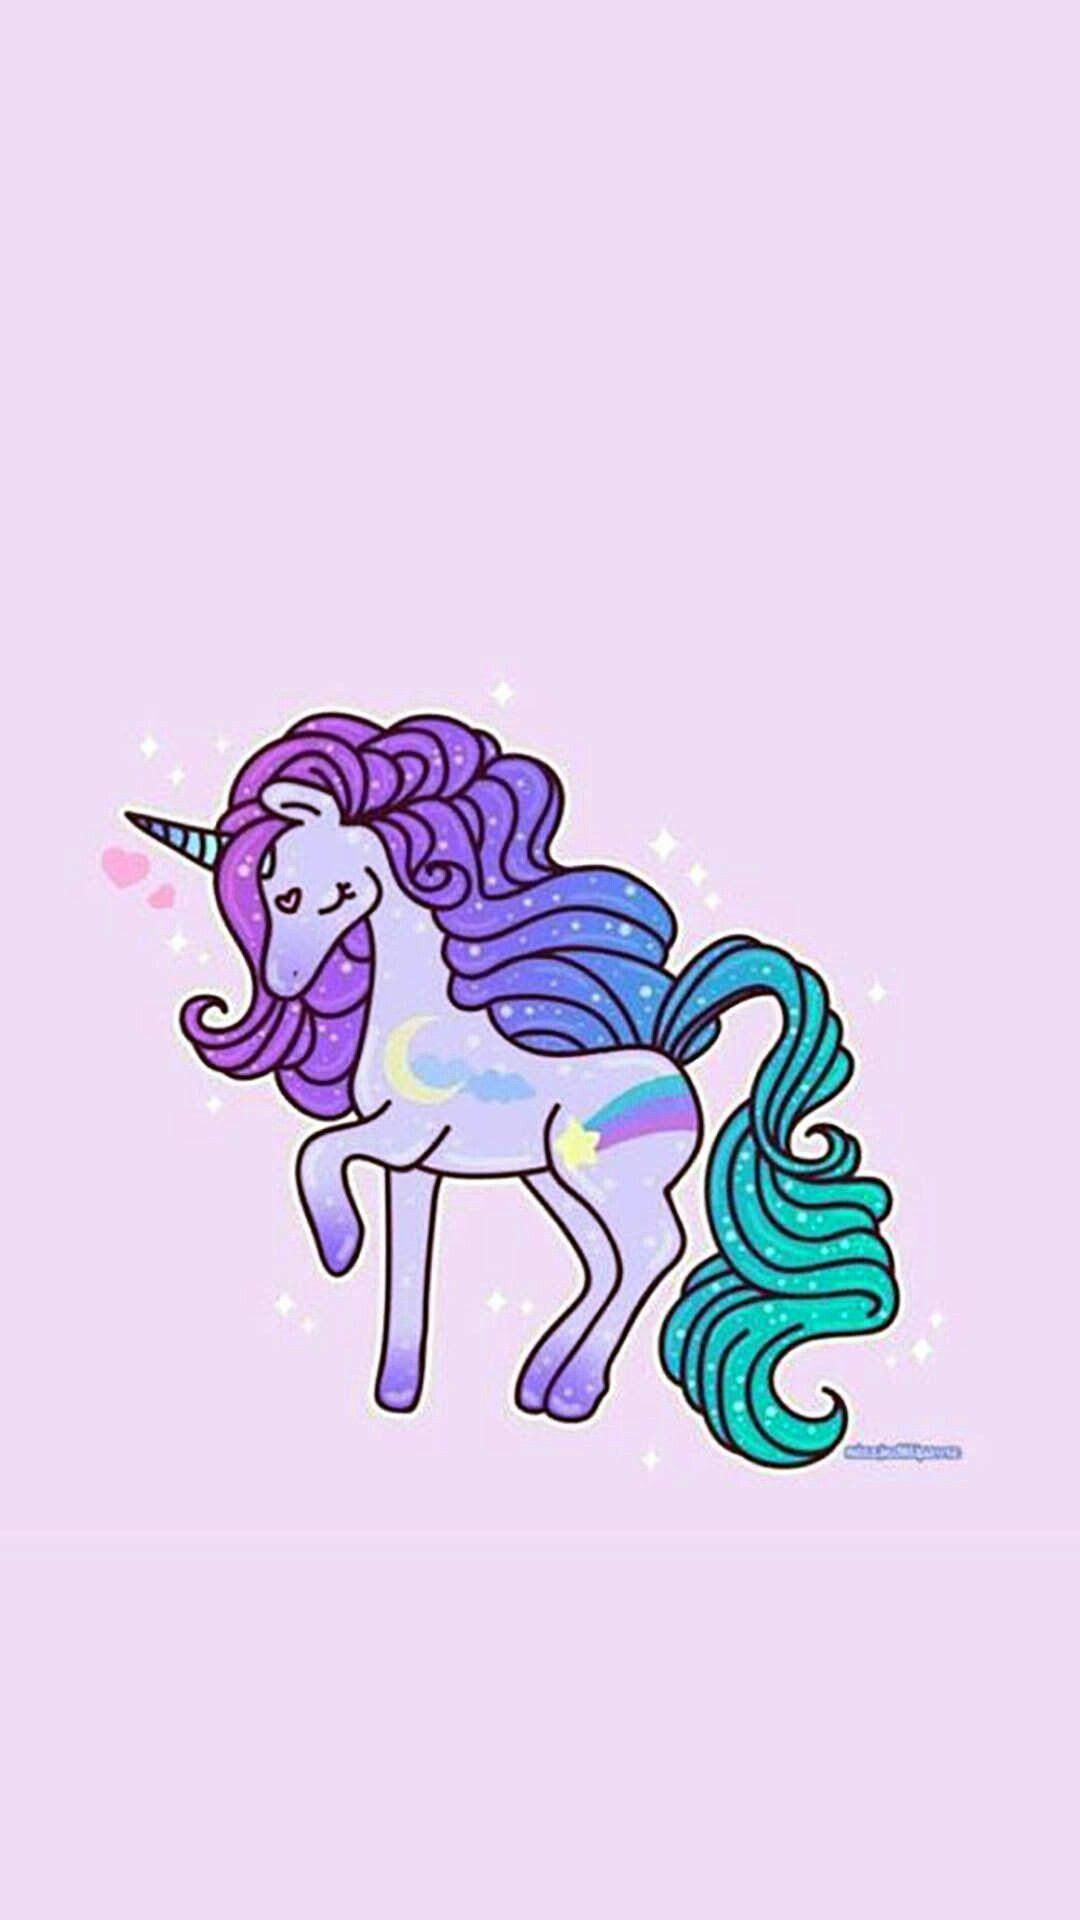 Cute Anime Unicorn Wallpapers - Wallpaper Cave